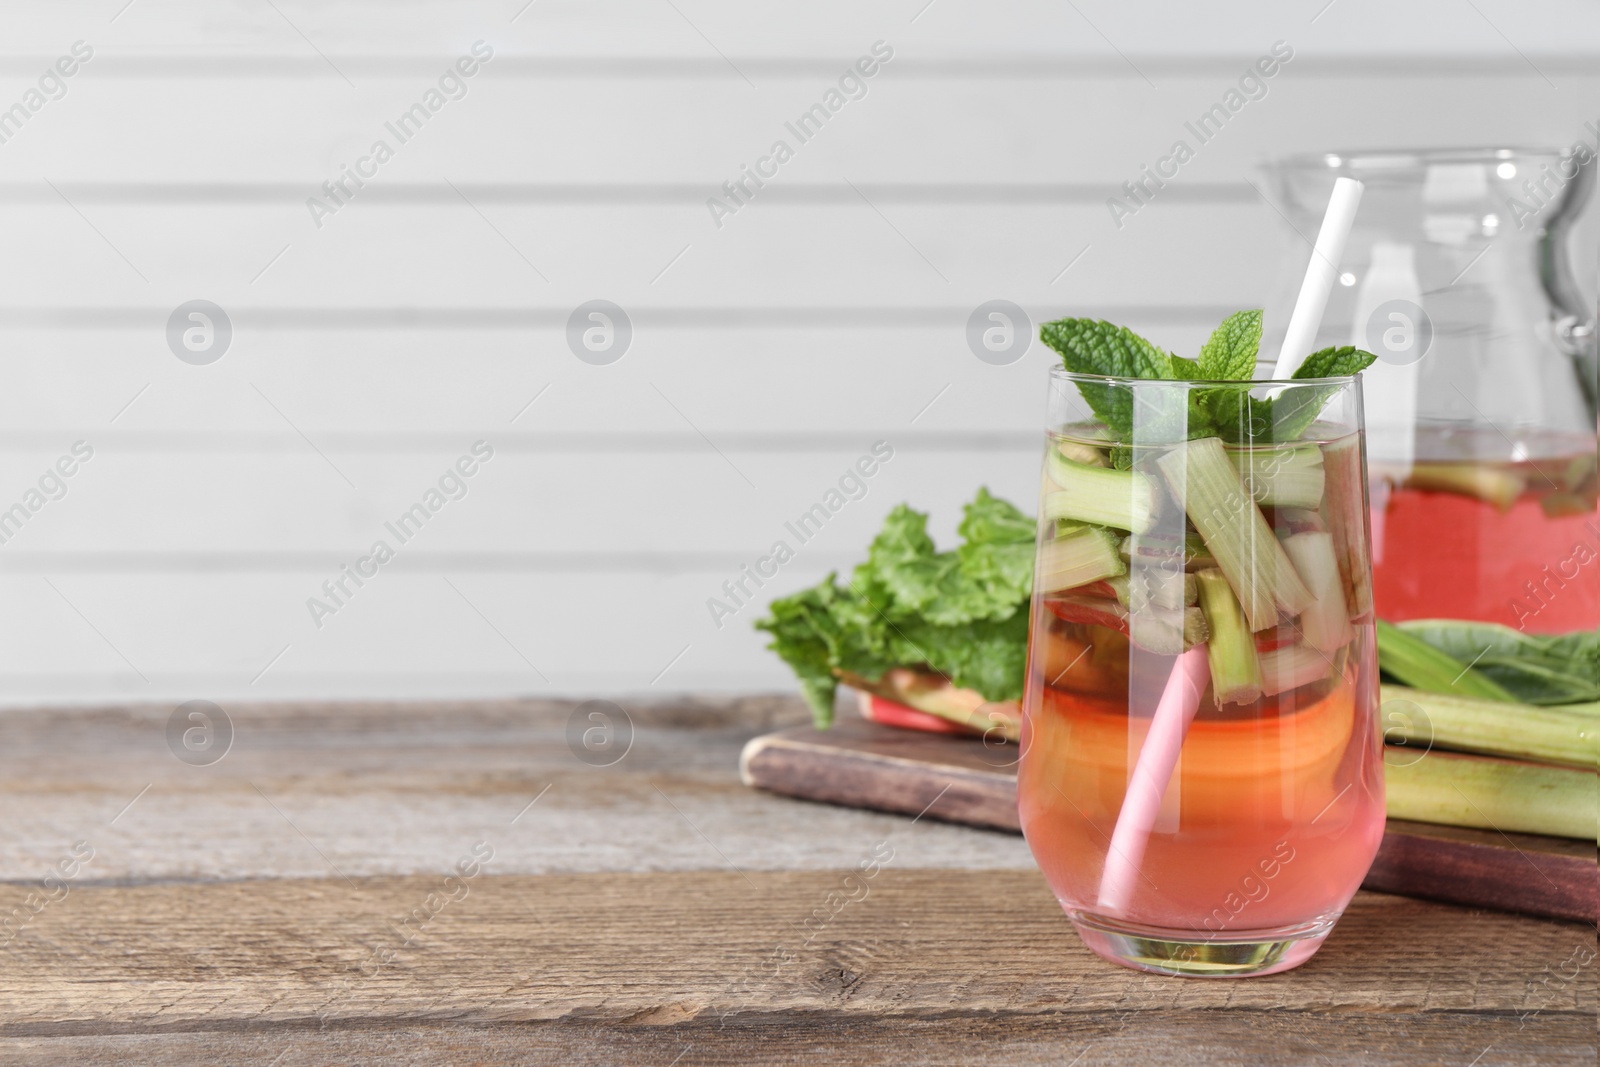 Photo of Glass and jug of tasty rhubarb cocktail on wooden table, space for text